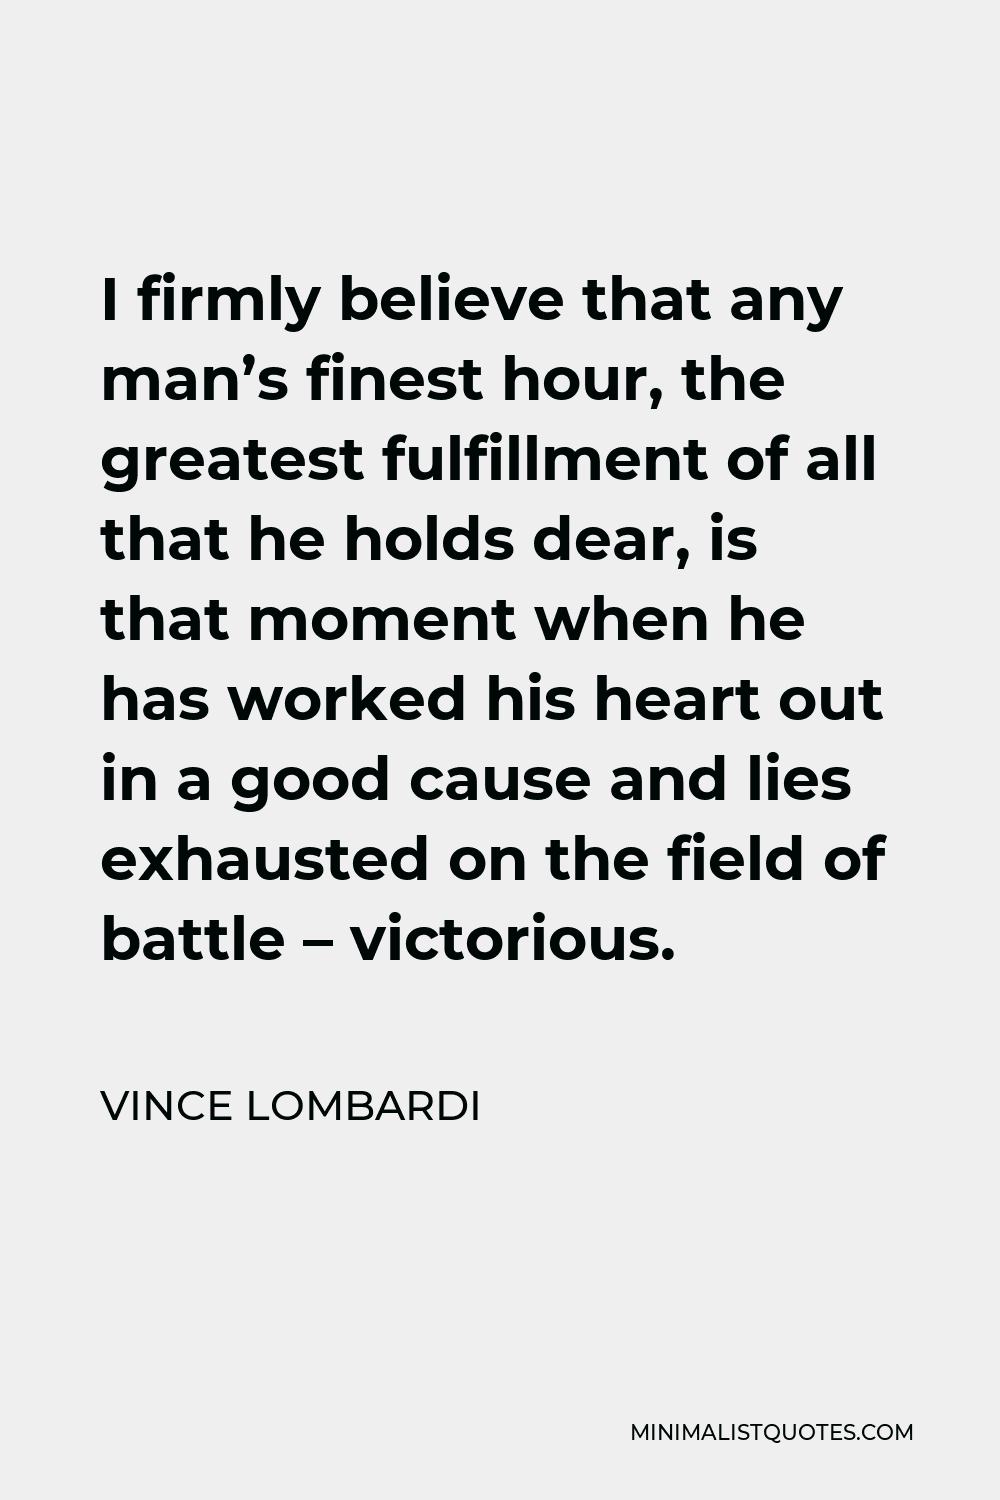 Vince Lombardi Quote - I firmly believe that any man’s finest hour, the greatest fulfillment of all that he holds dear, is that moment when he has worked his heart out in a good cause and lies exhausted on the field of battle – victorious.